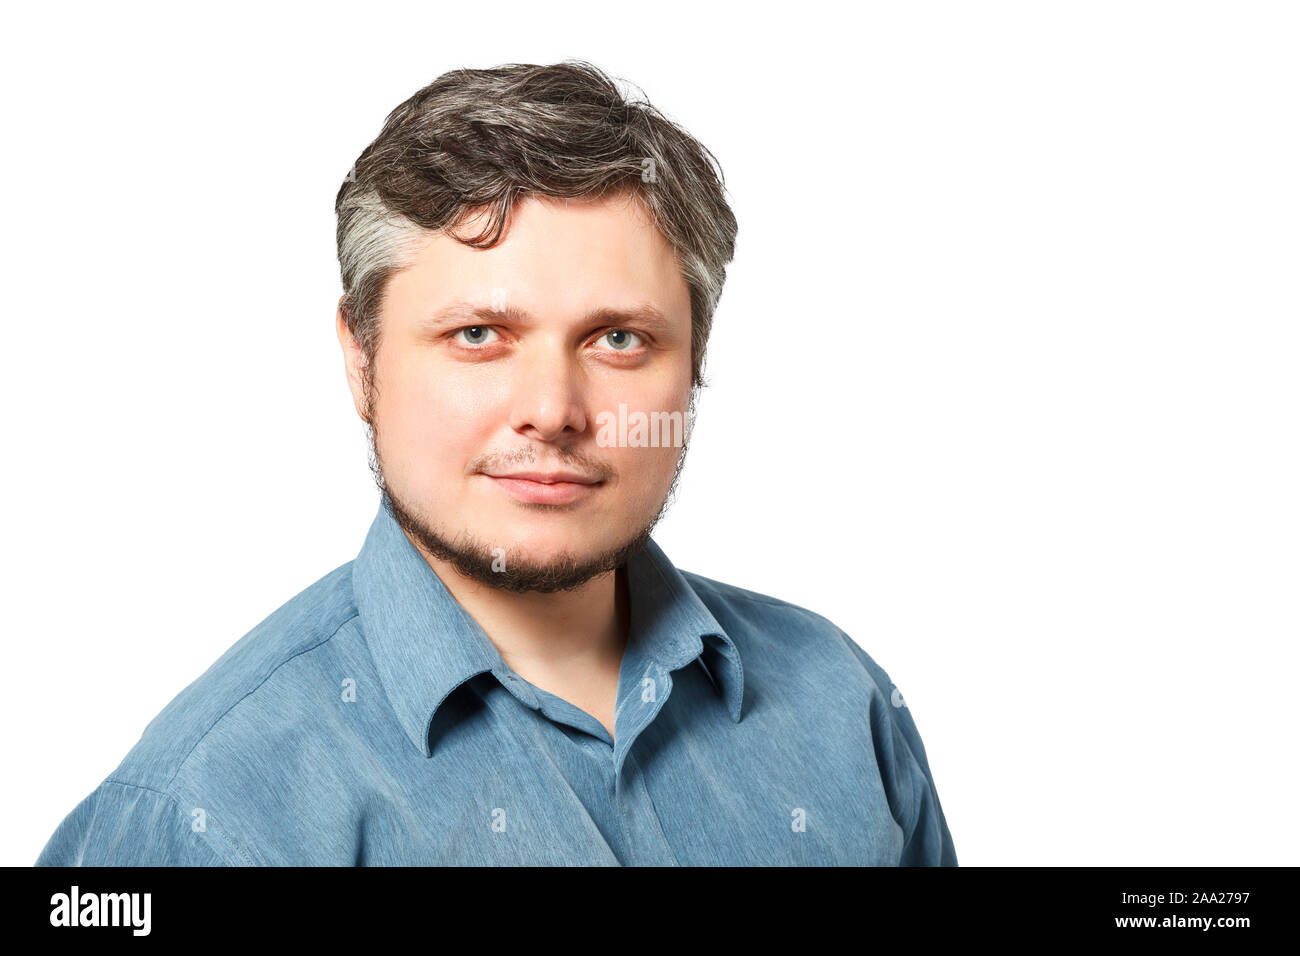 Handsome caucasian man smiling portrait on white isolated background with blue shirt. Stock Photo